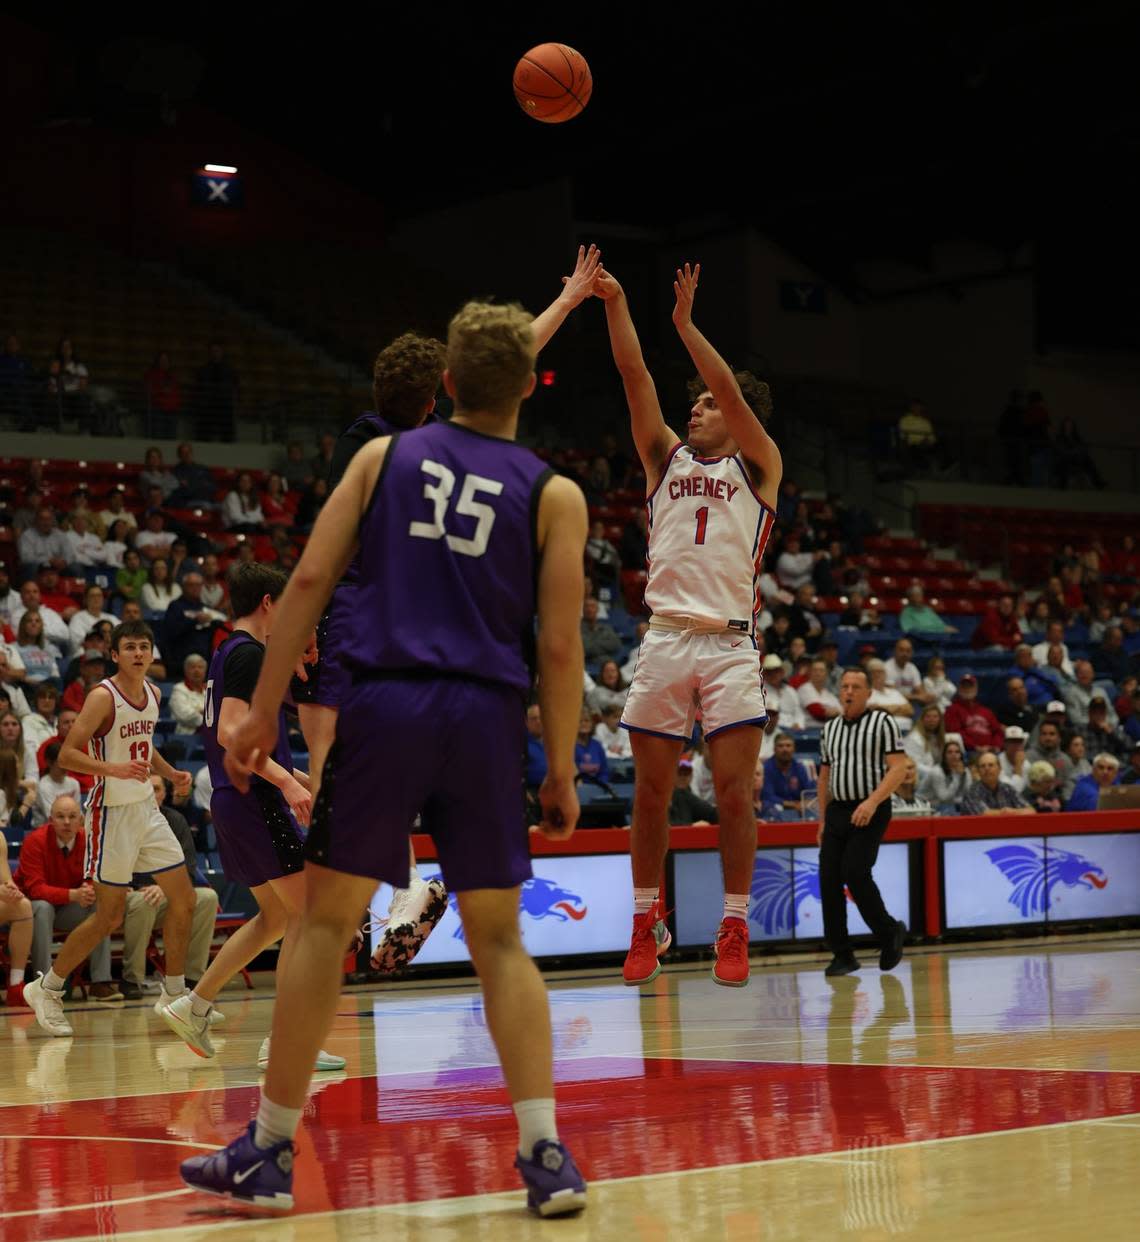 Cheney senior Jackson Voth helped lead the Cardinals back to the Class 3A state tournament.